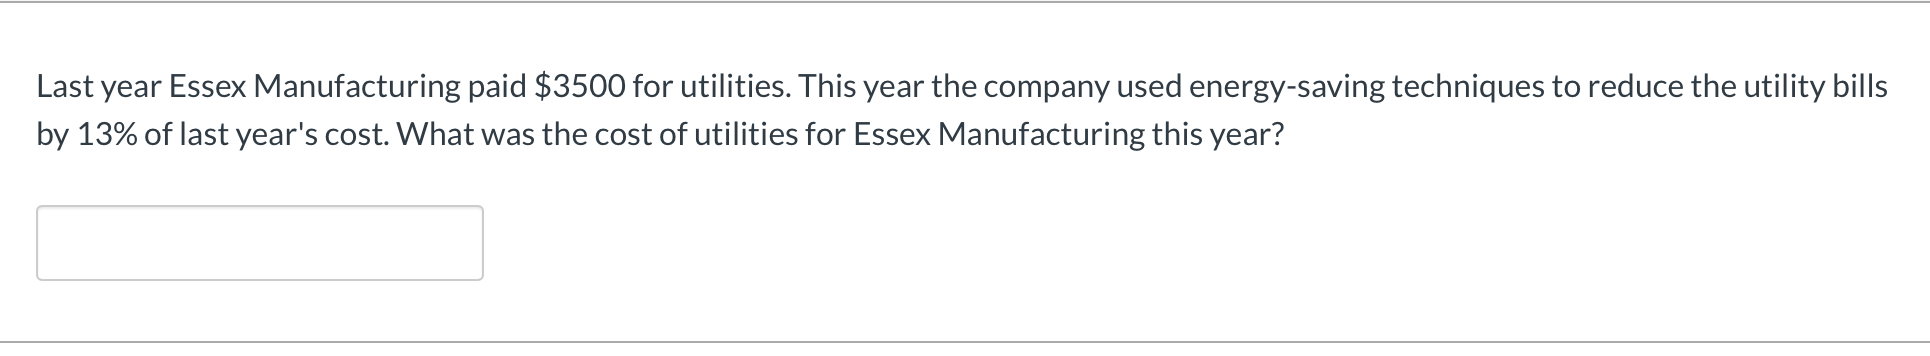 Last year Essex Manufacturing paid $3500 for utilities. This year the company used energy-saving techniques to reduce the utility bills
by 13% of last year's cost. What was the cost of utilities for Essex Manufacturing this year?
